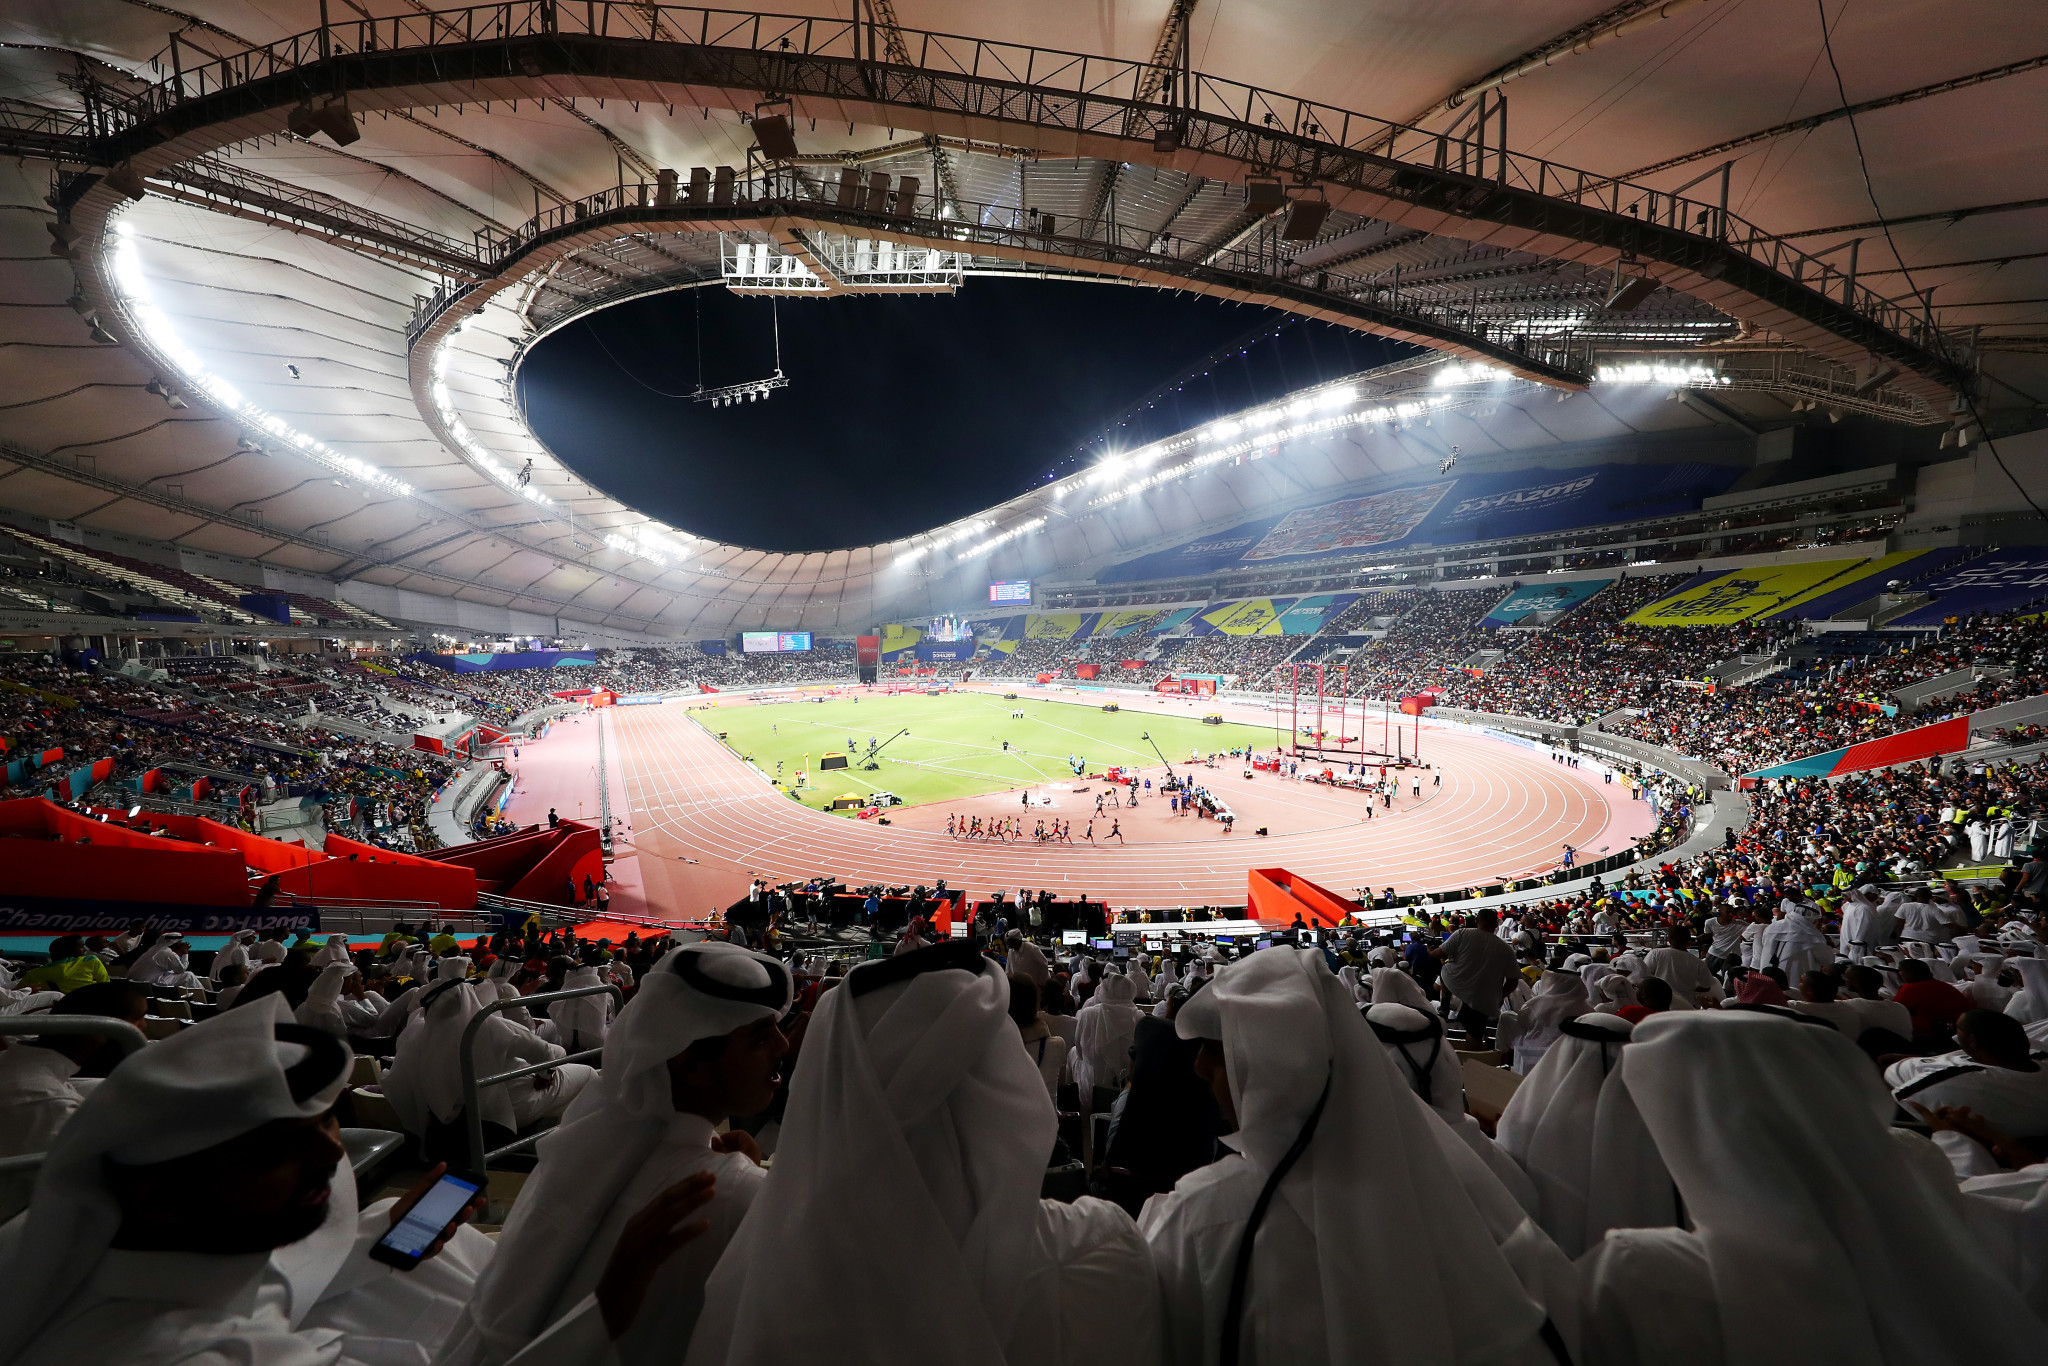 Qatar start offering free tickets for IAAF World Championships to boost attendances